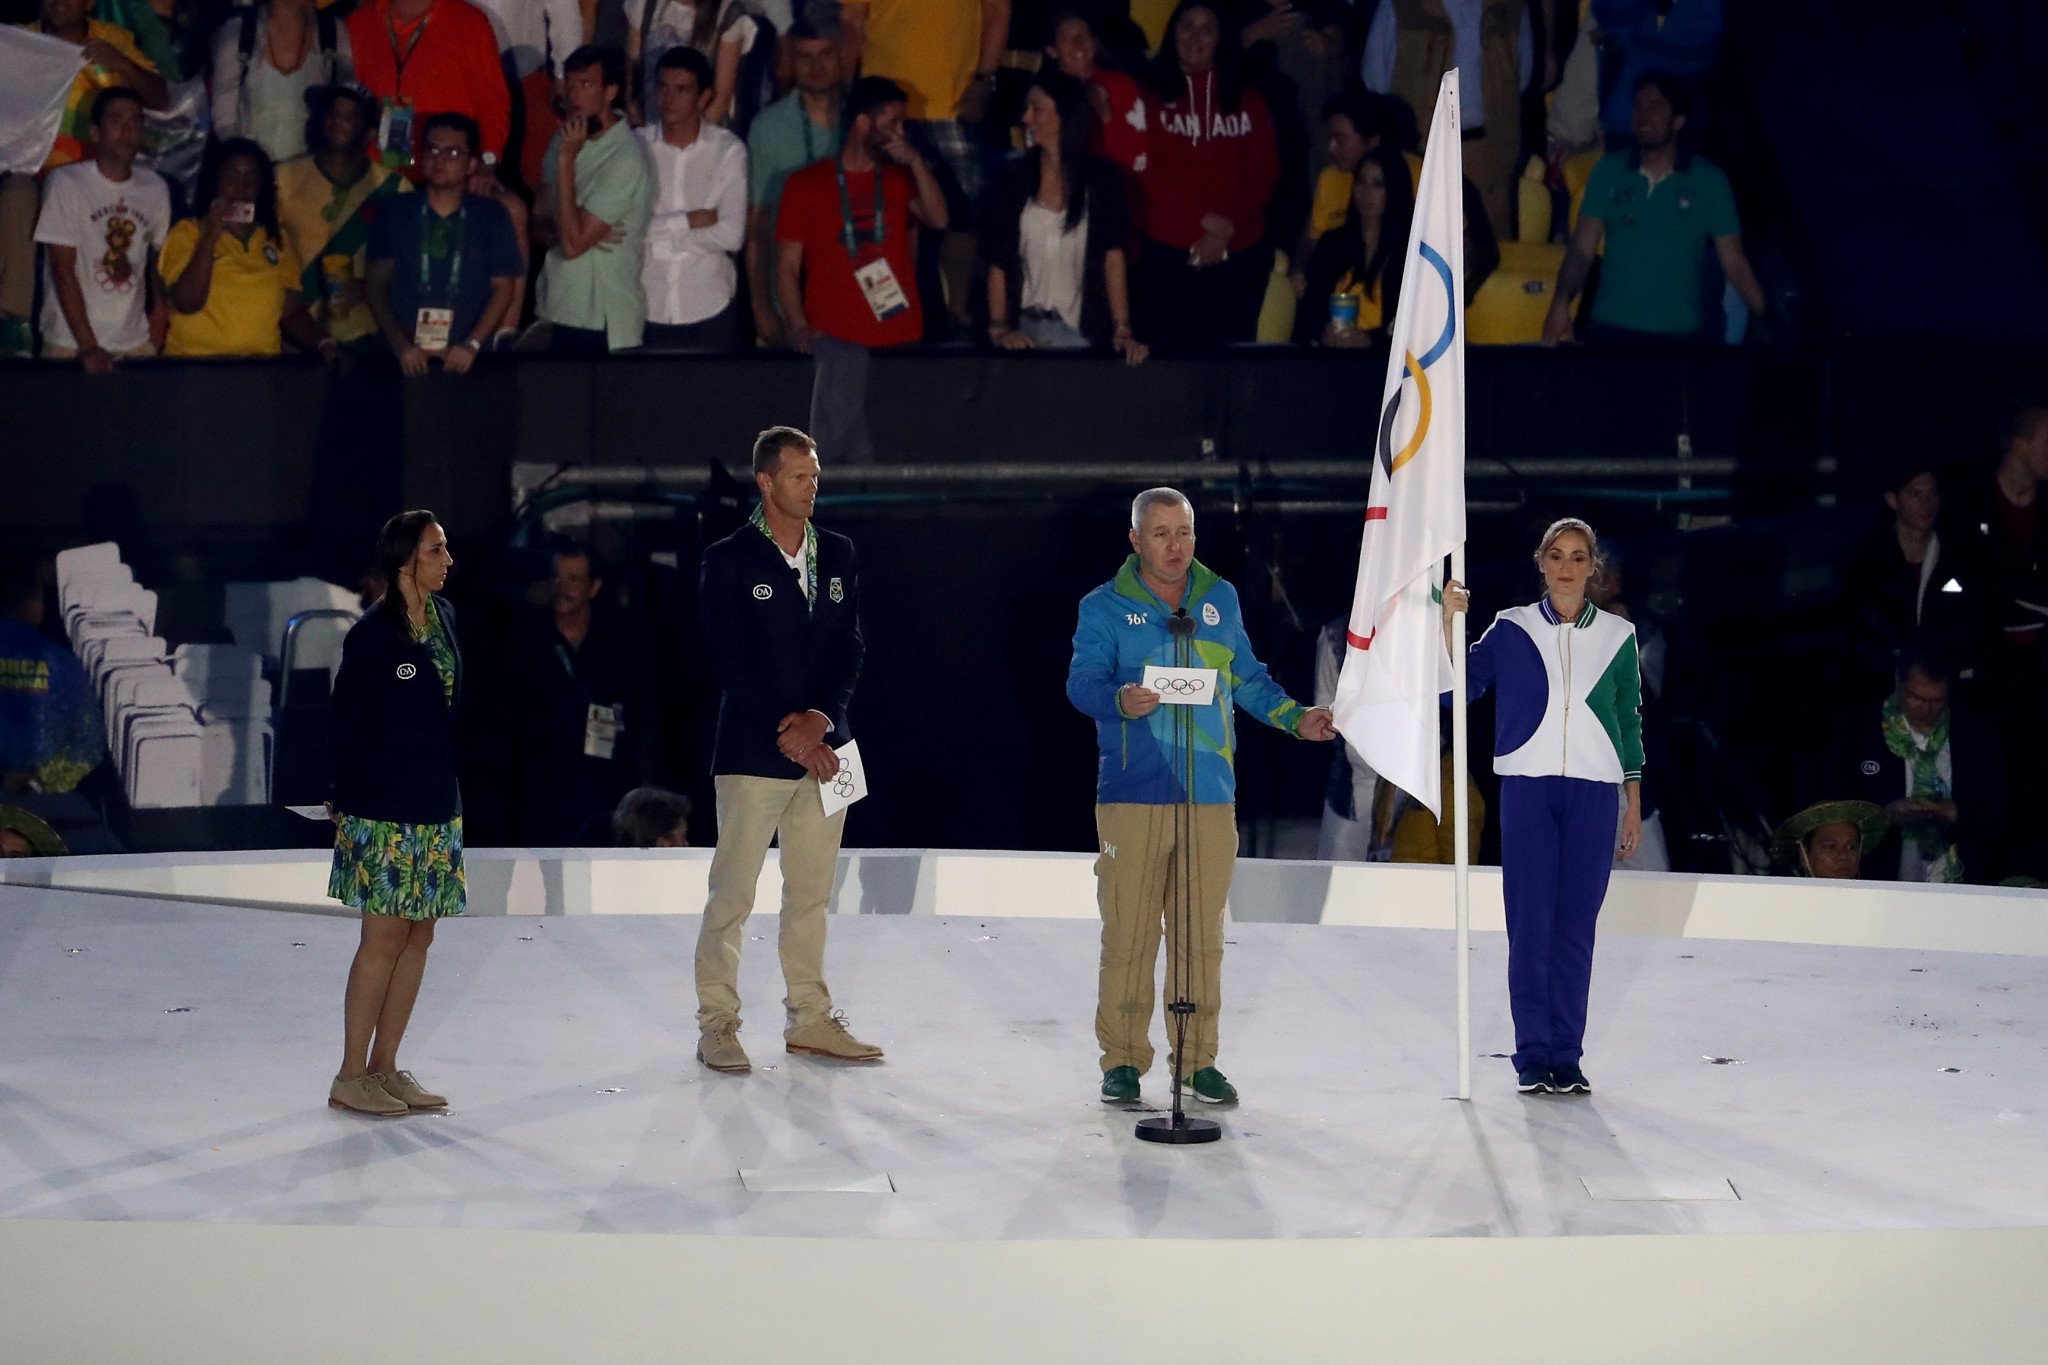 The Olympic Oath is taken at the Rio 2016 Games ©Getty Images